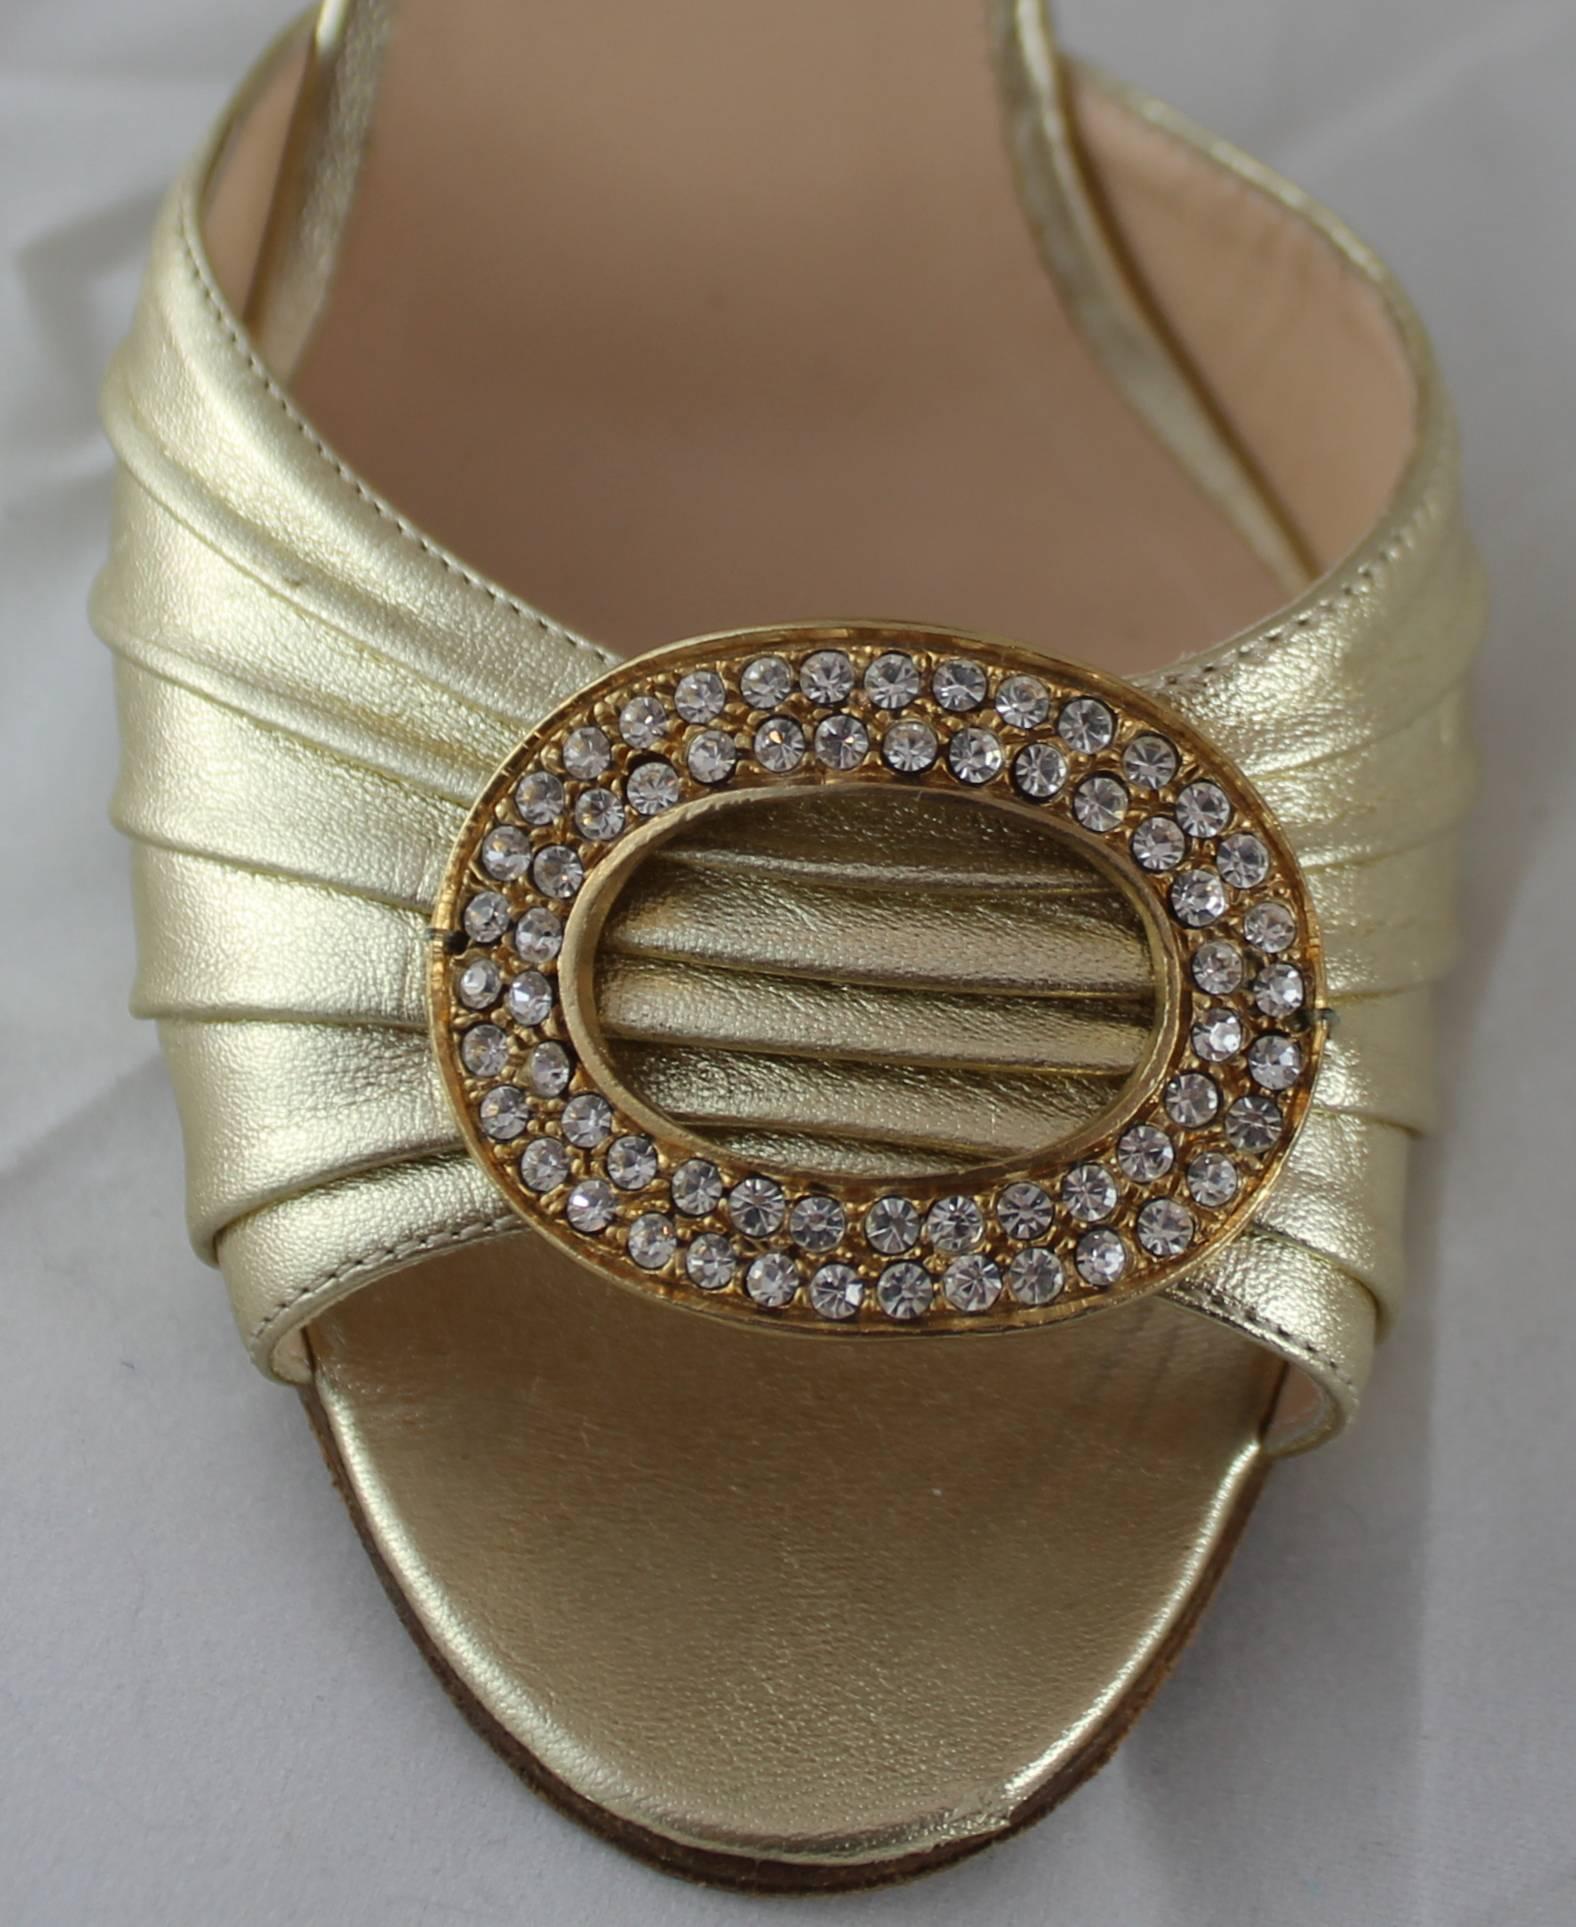 Manolo Blahnik Gold D'Orsay Heels with Rhinestone Detail - 36.5 In Good Condition For Sale In West Palm Beach, FL